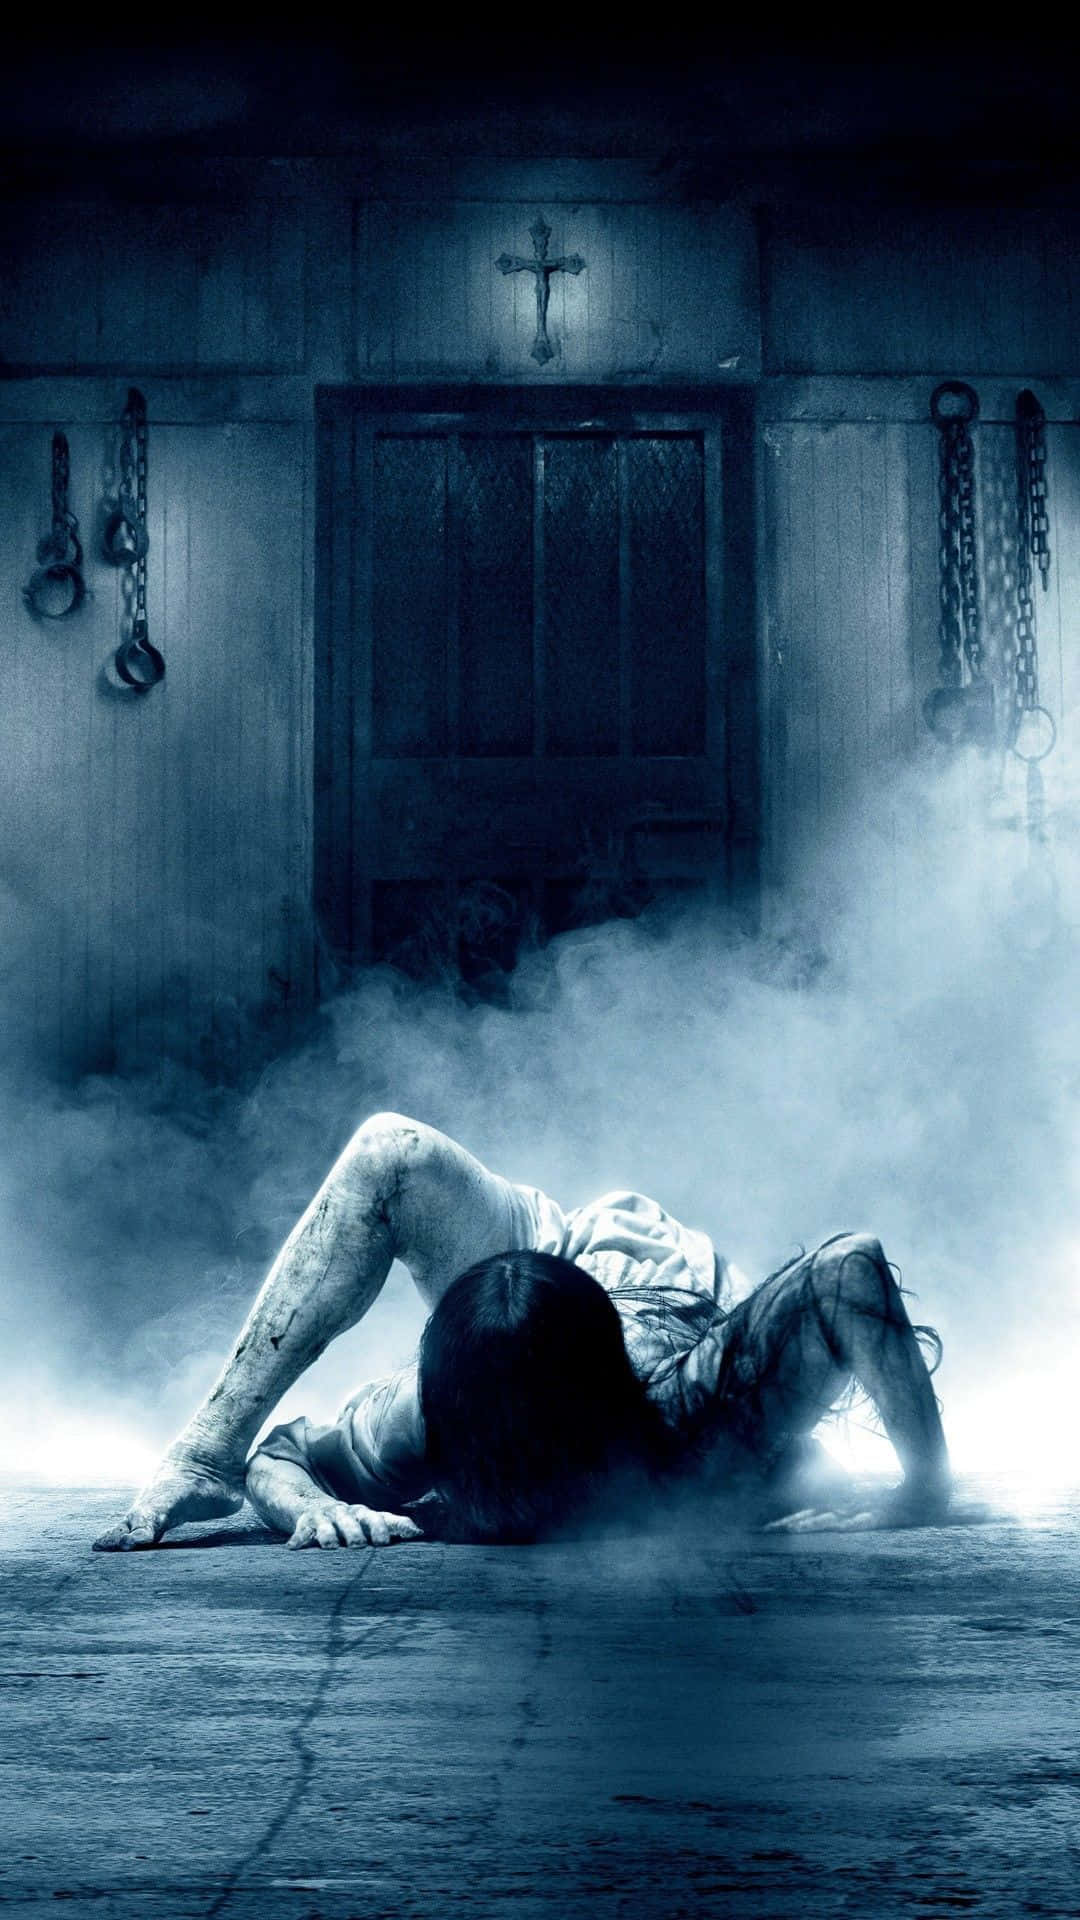 Free Horror Iphone Wallpaper Downloads, [100+] Horror Iphone Wallpapers for  FREE 